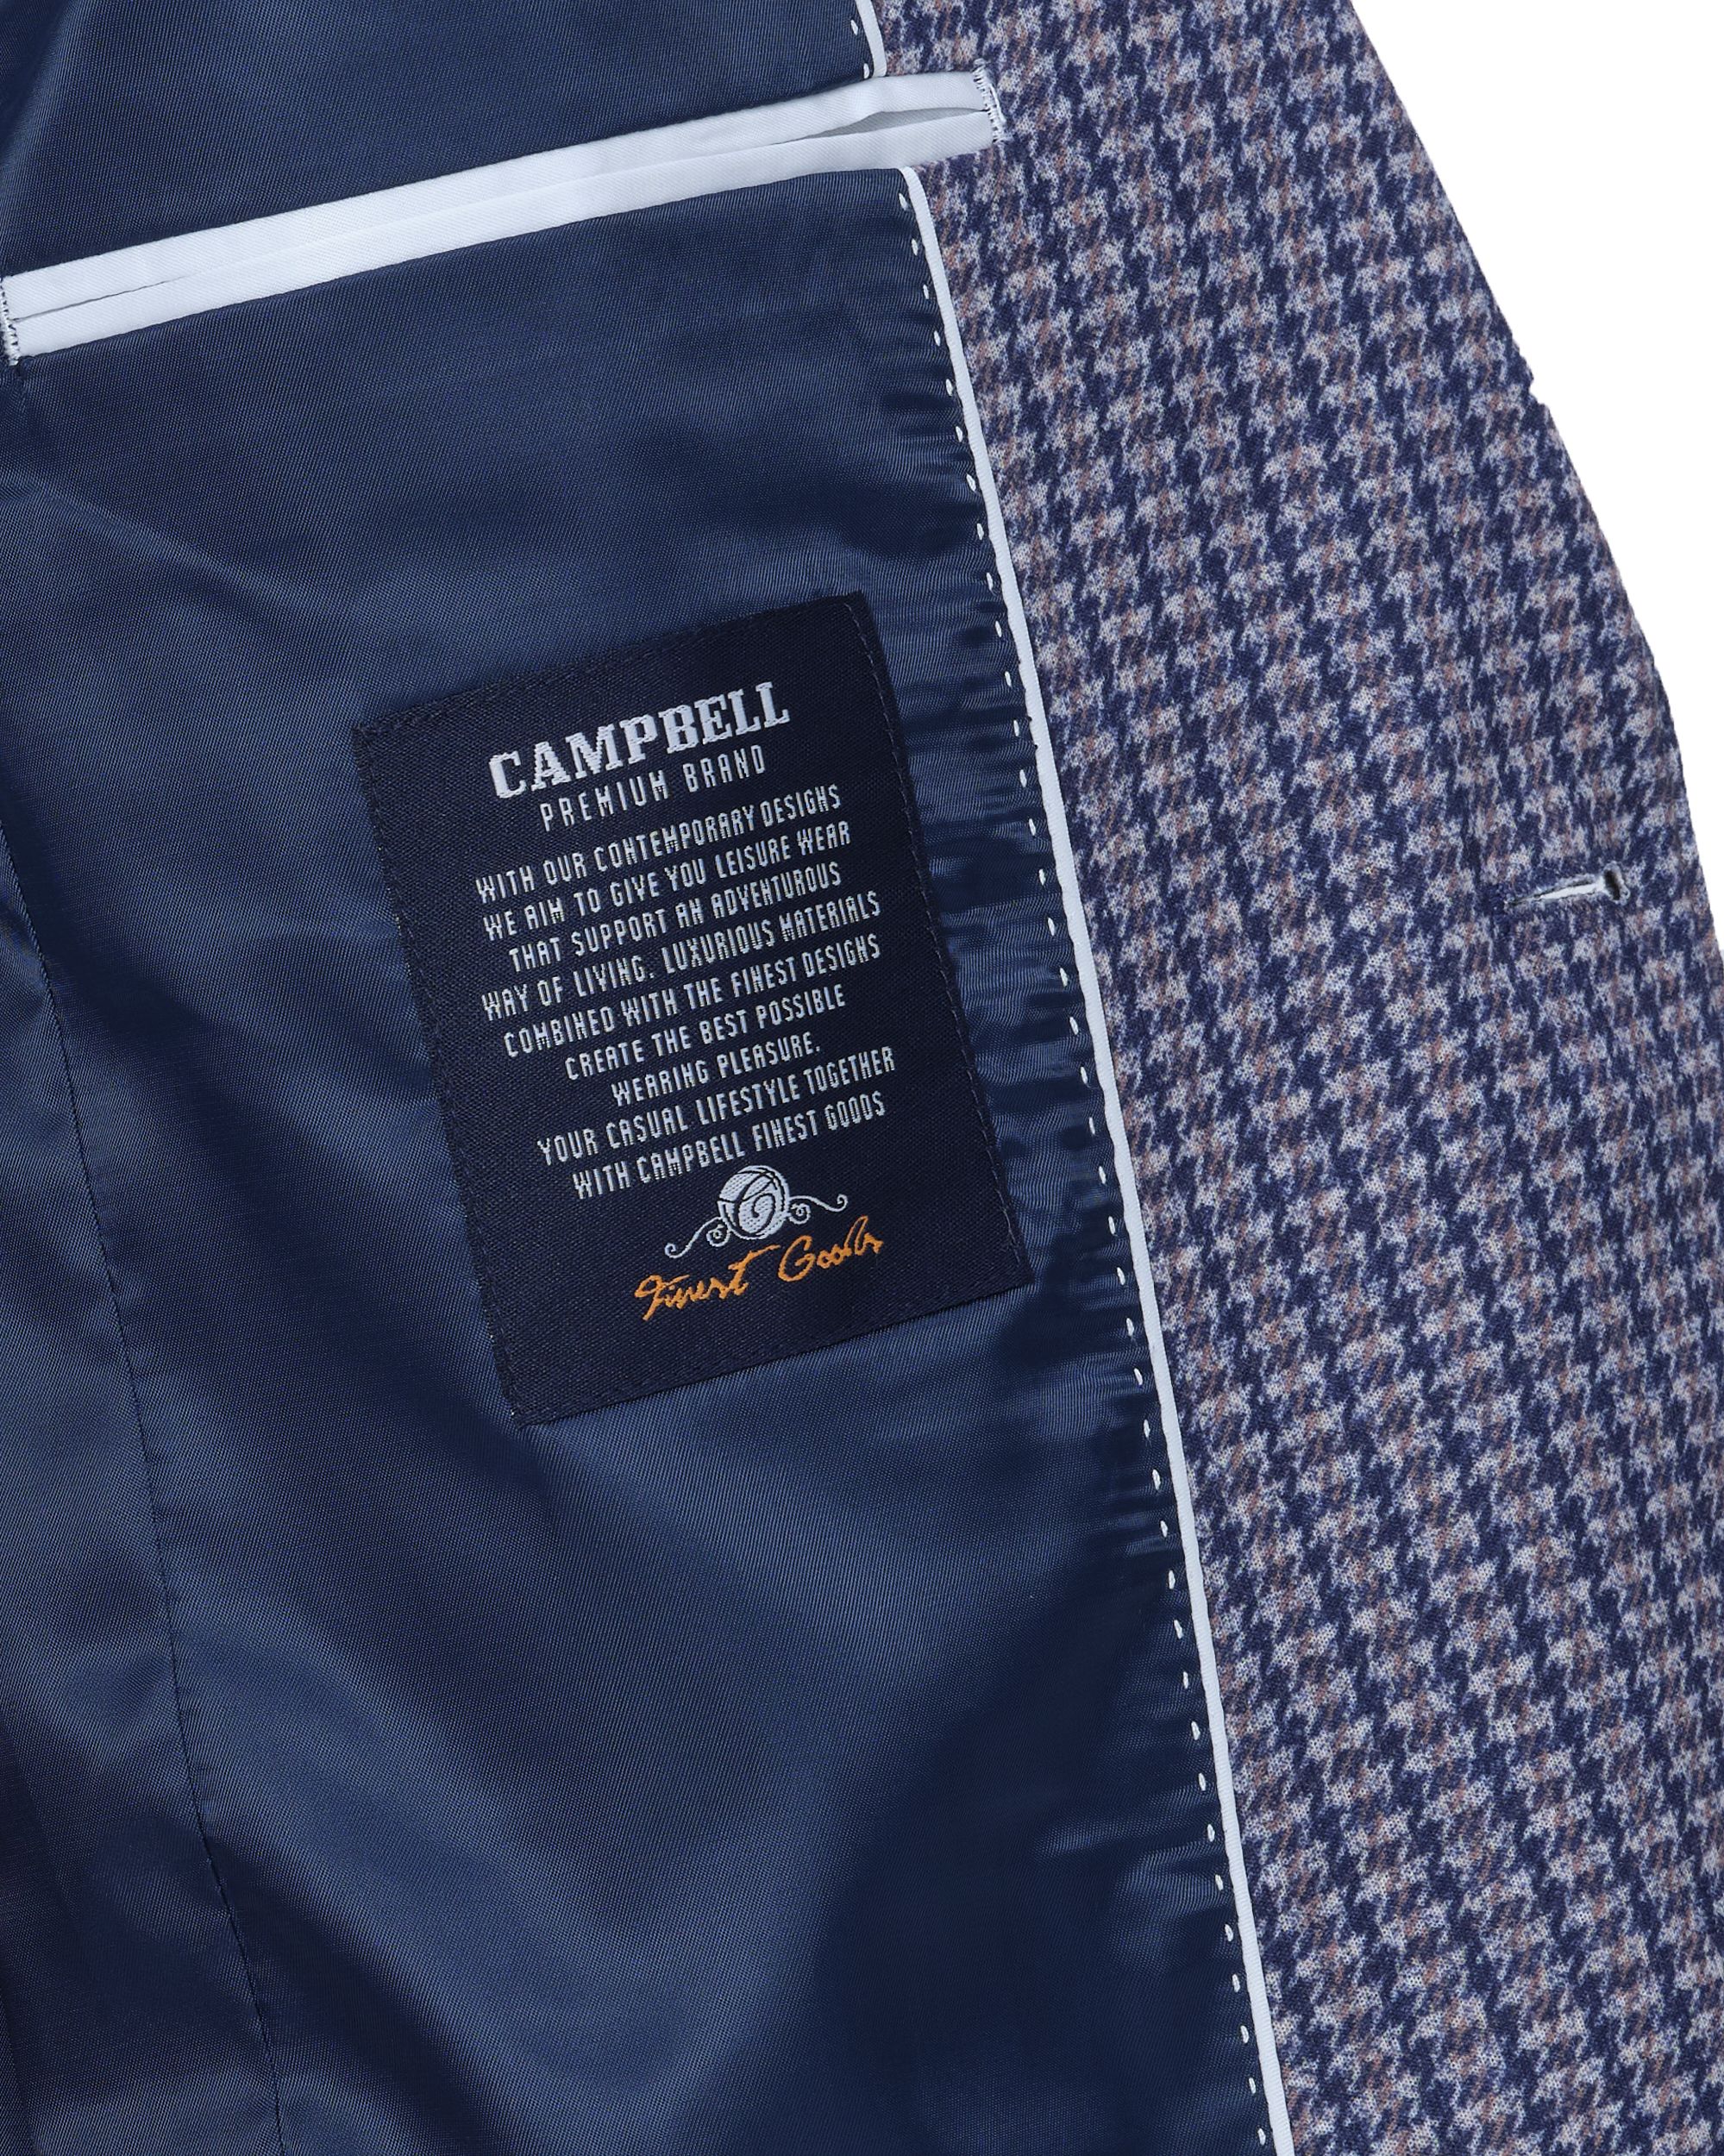 Campbell Classic Blazer Navy grote ruit 081513-001-48